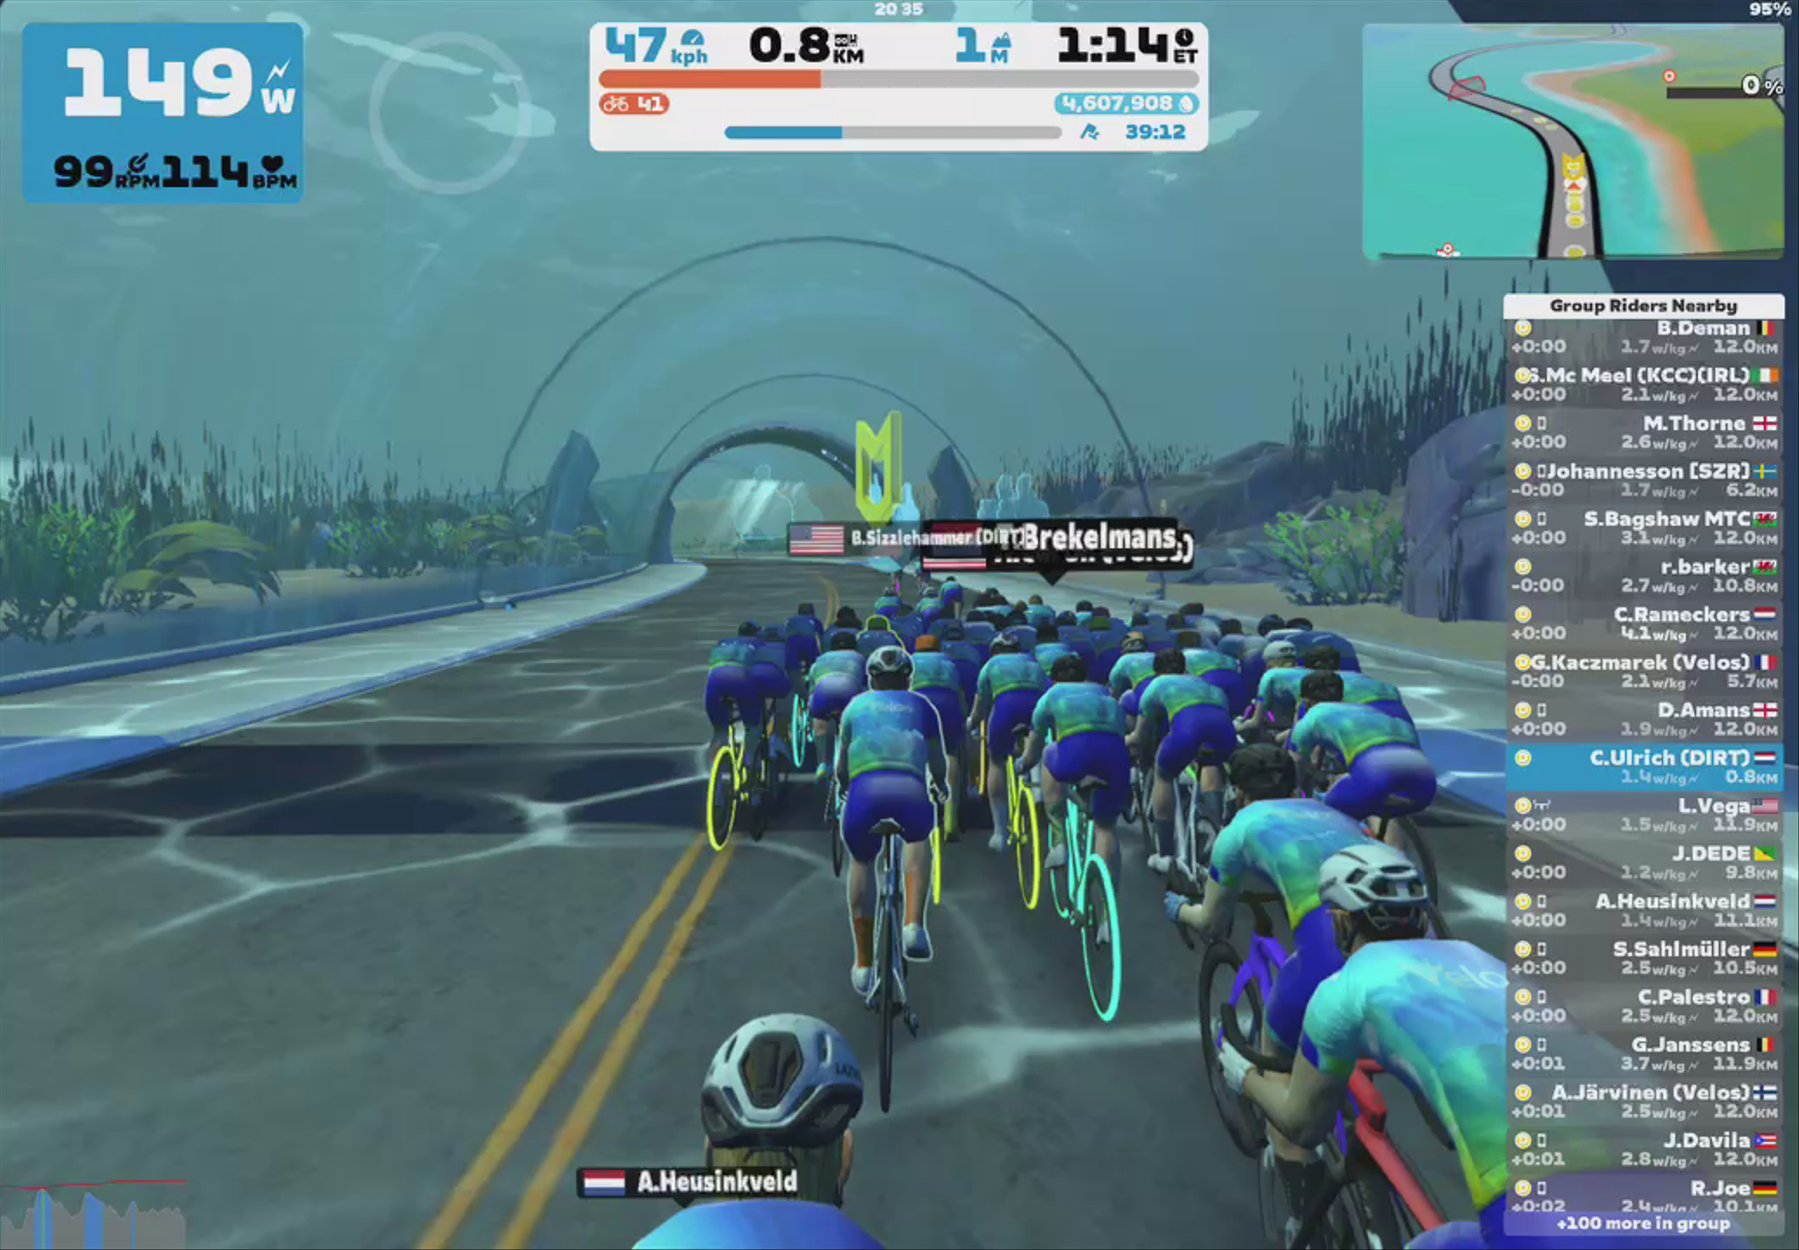 Zwift - Group Ride: Team Velos Social Sprint Series (D) on Flat Route in Watopia